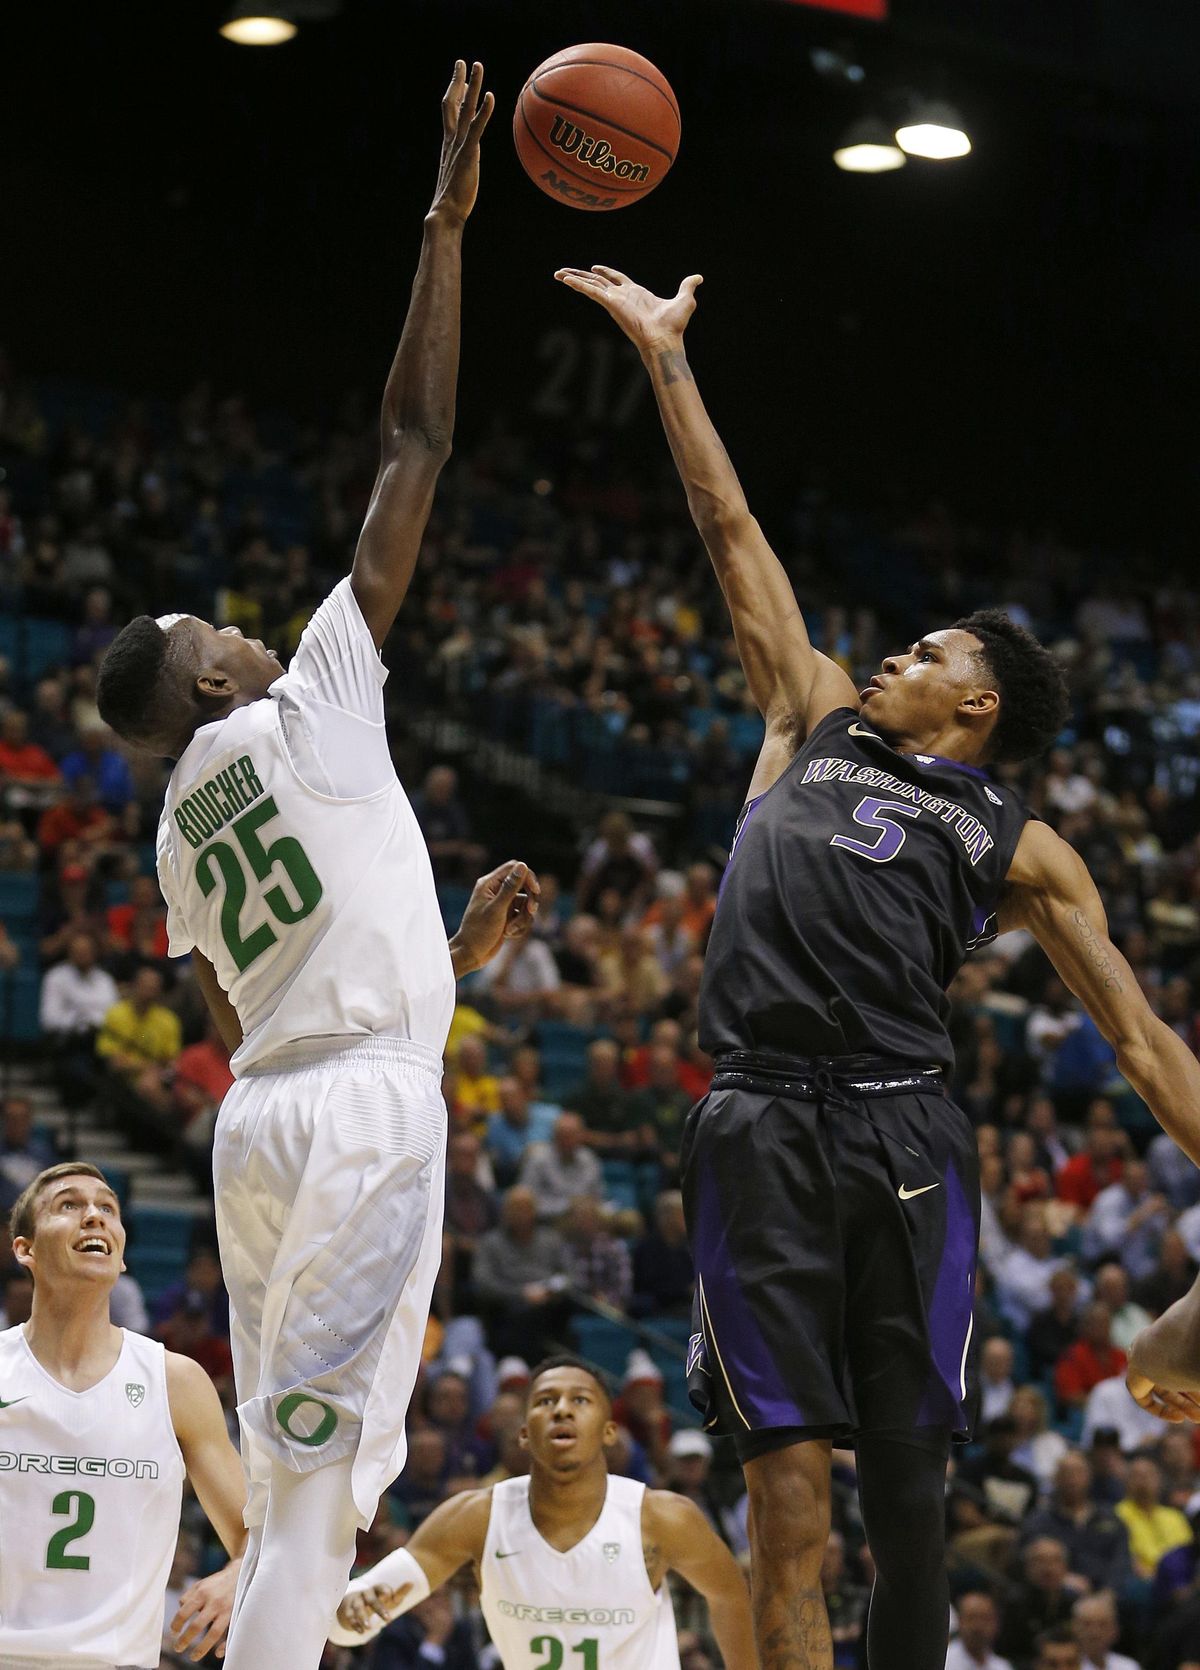 Oregon forward Chris Boucher, left, blocks a shot by Washington guard Dejounte Murray during the first half of an NCAA college basketball game in the quarterfinal round of the Pac-12 men’s tournament Thursday, March 10, 2016, in Las Vegas. (John Locher / Associated Press)